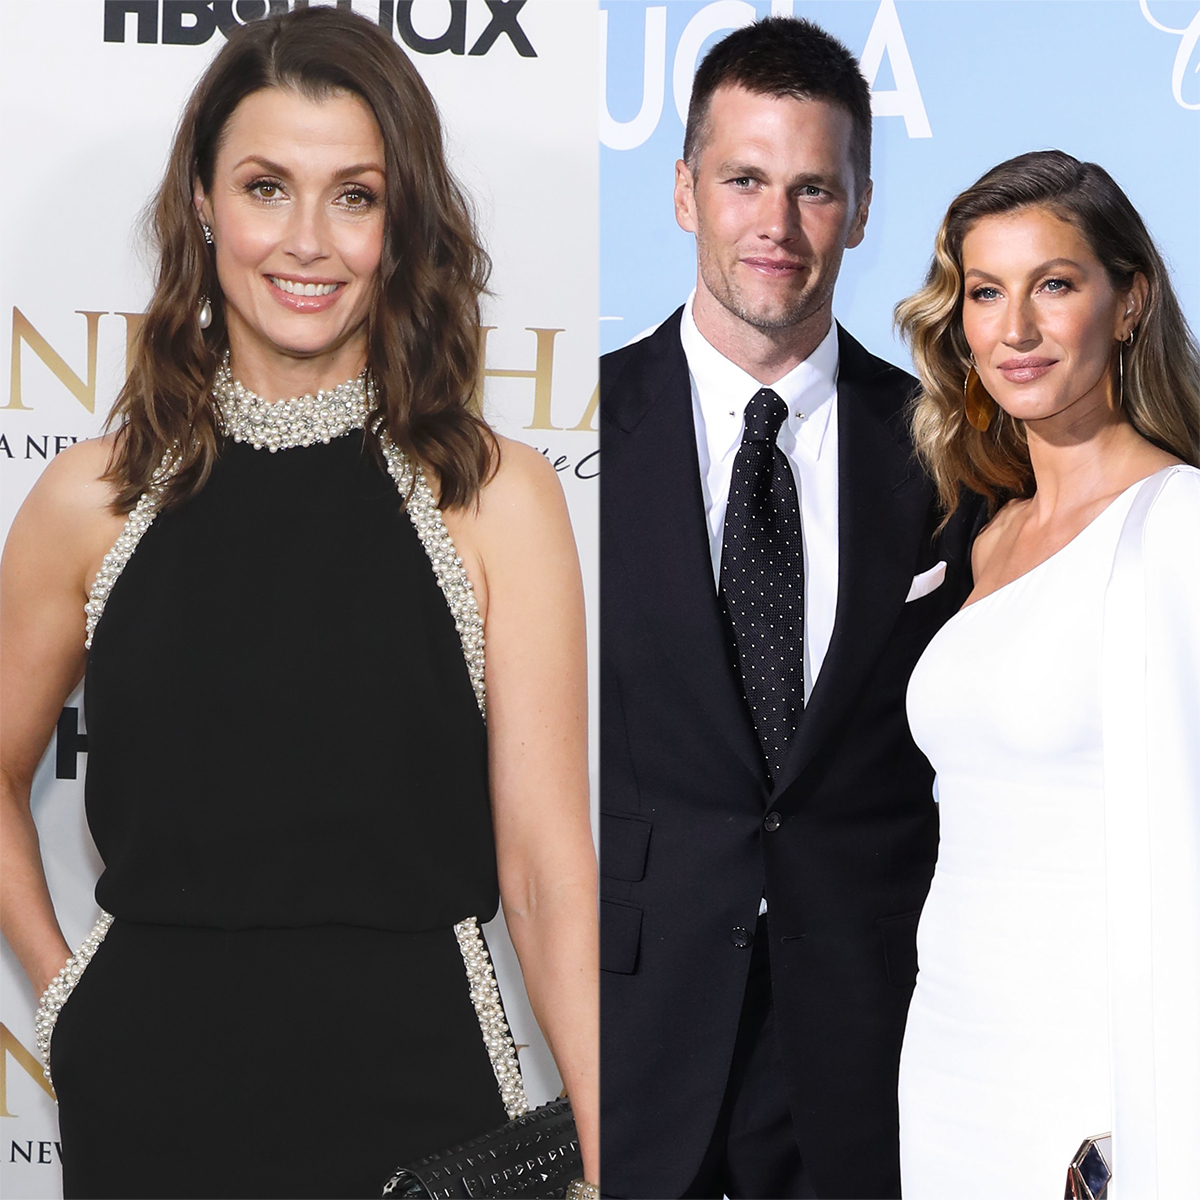 Gisele Bündchen Recalls "Challenging" Time of Learning Tom Brady Had Fathered Child With Bridget Moynahan